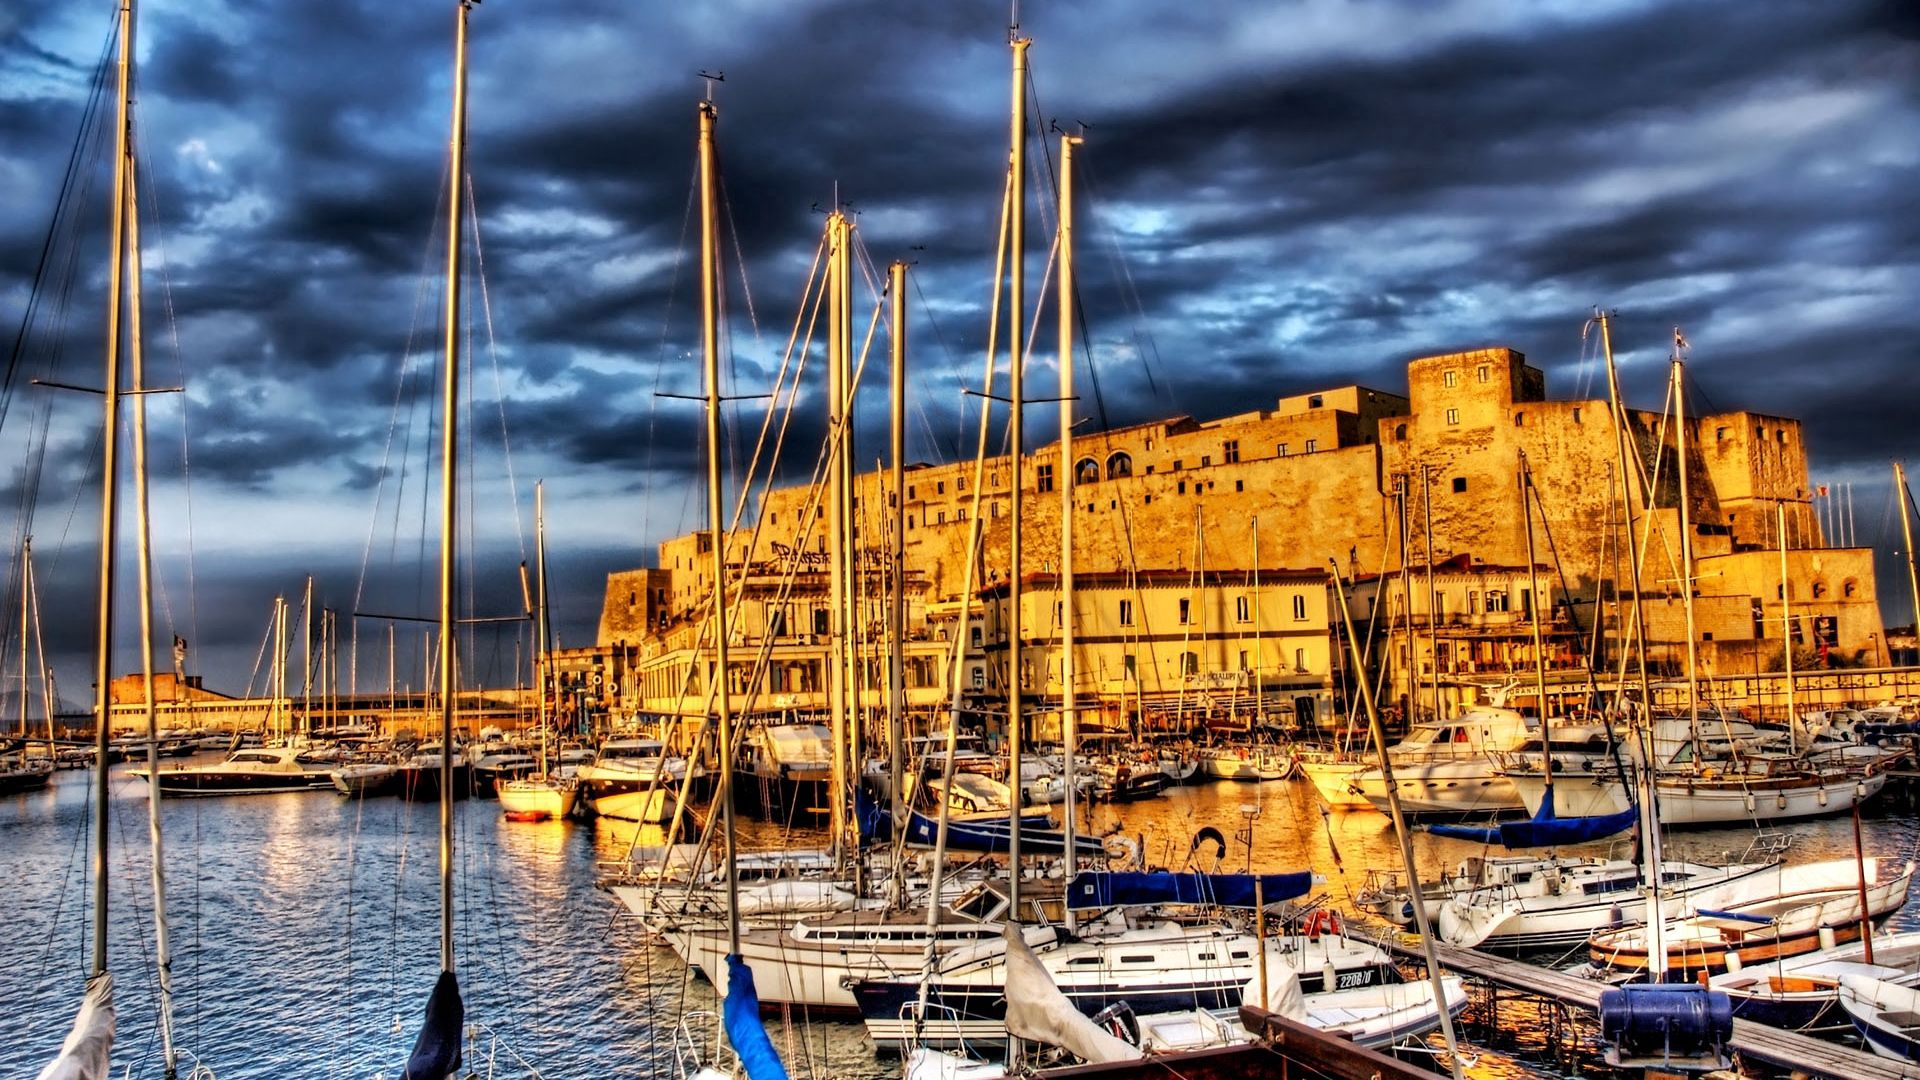 cities, yachts, boats, building, pier, france, hdr, terra minor